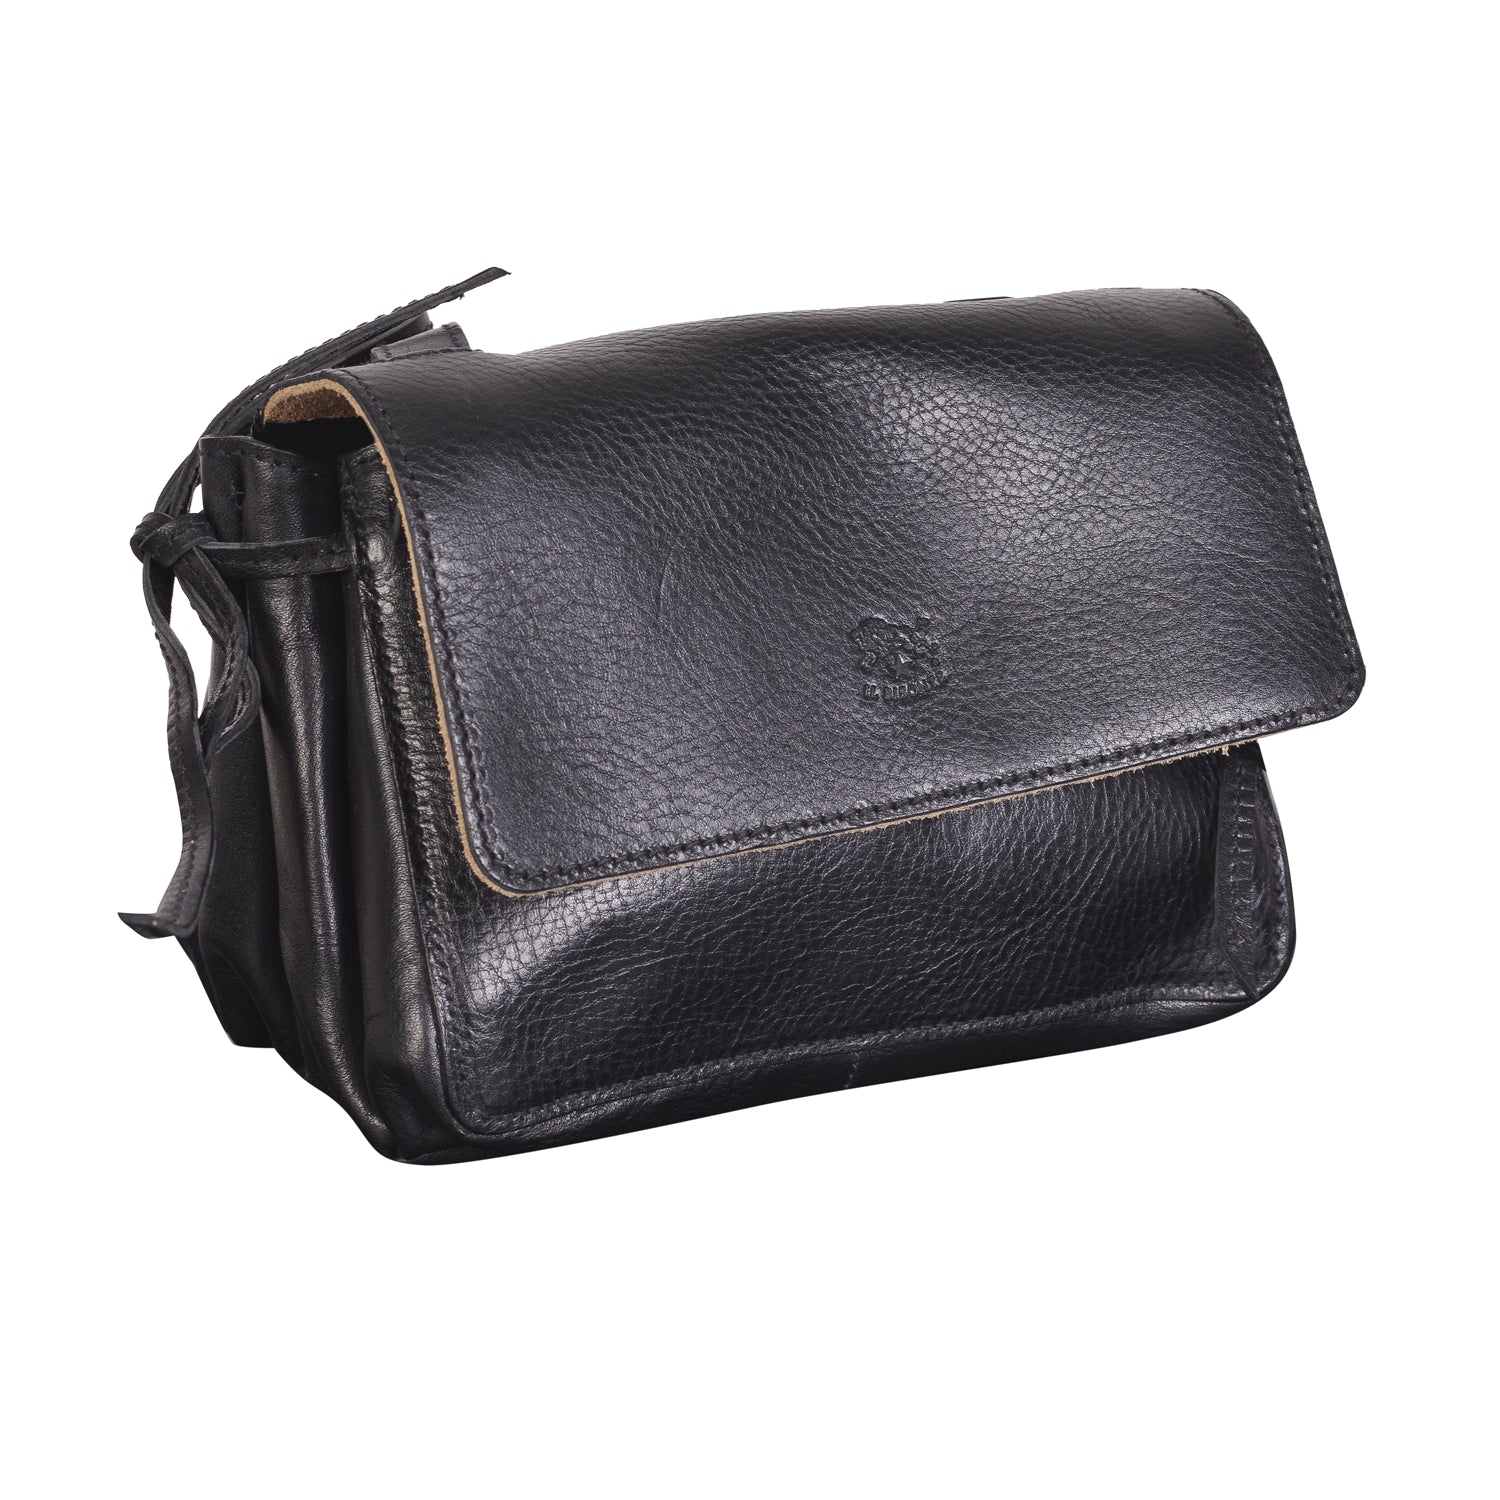 NEW IL BISONTE WOMEN'S SOFFIETTO COLLECTION CROSSBODY BAG IN BLACK LEATHER